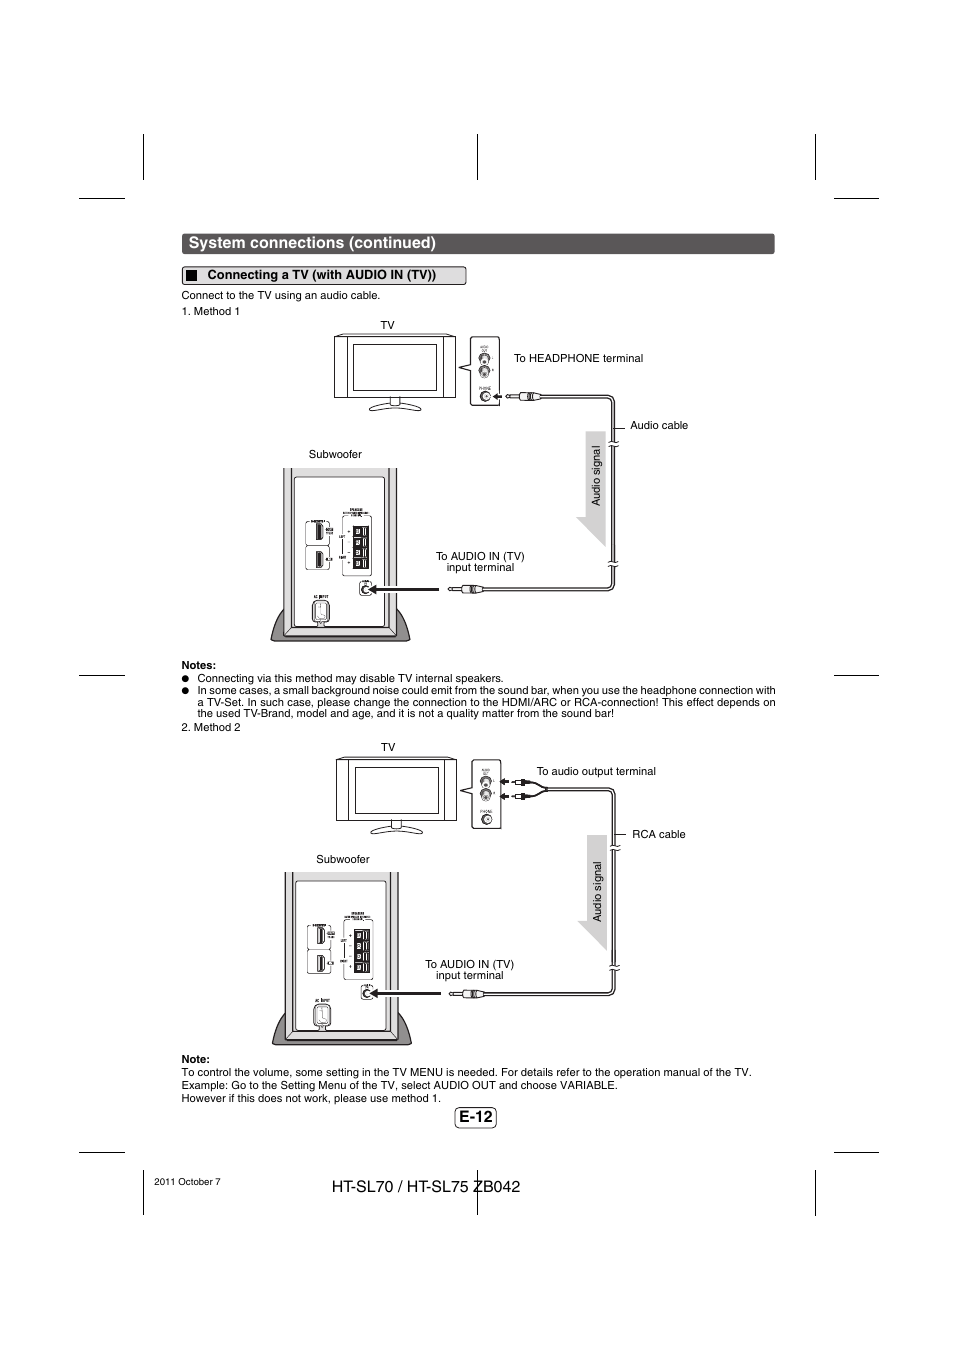 Connecting a tv (with audio in (tv)), E-12, System connections (continued) | Sharp HT-SL75 User Manual | Page 13 / 16